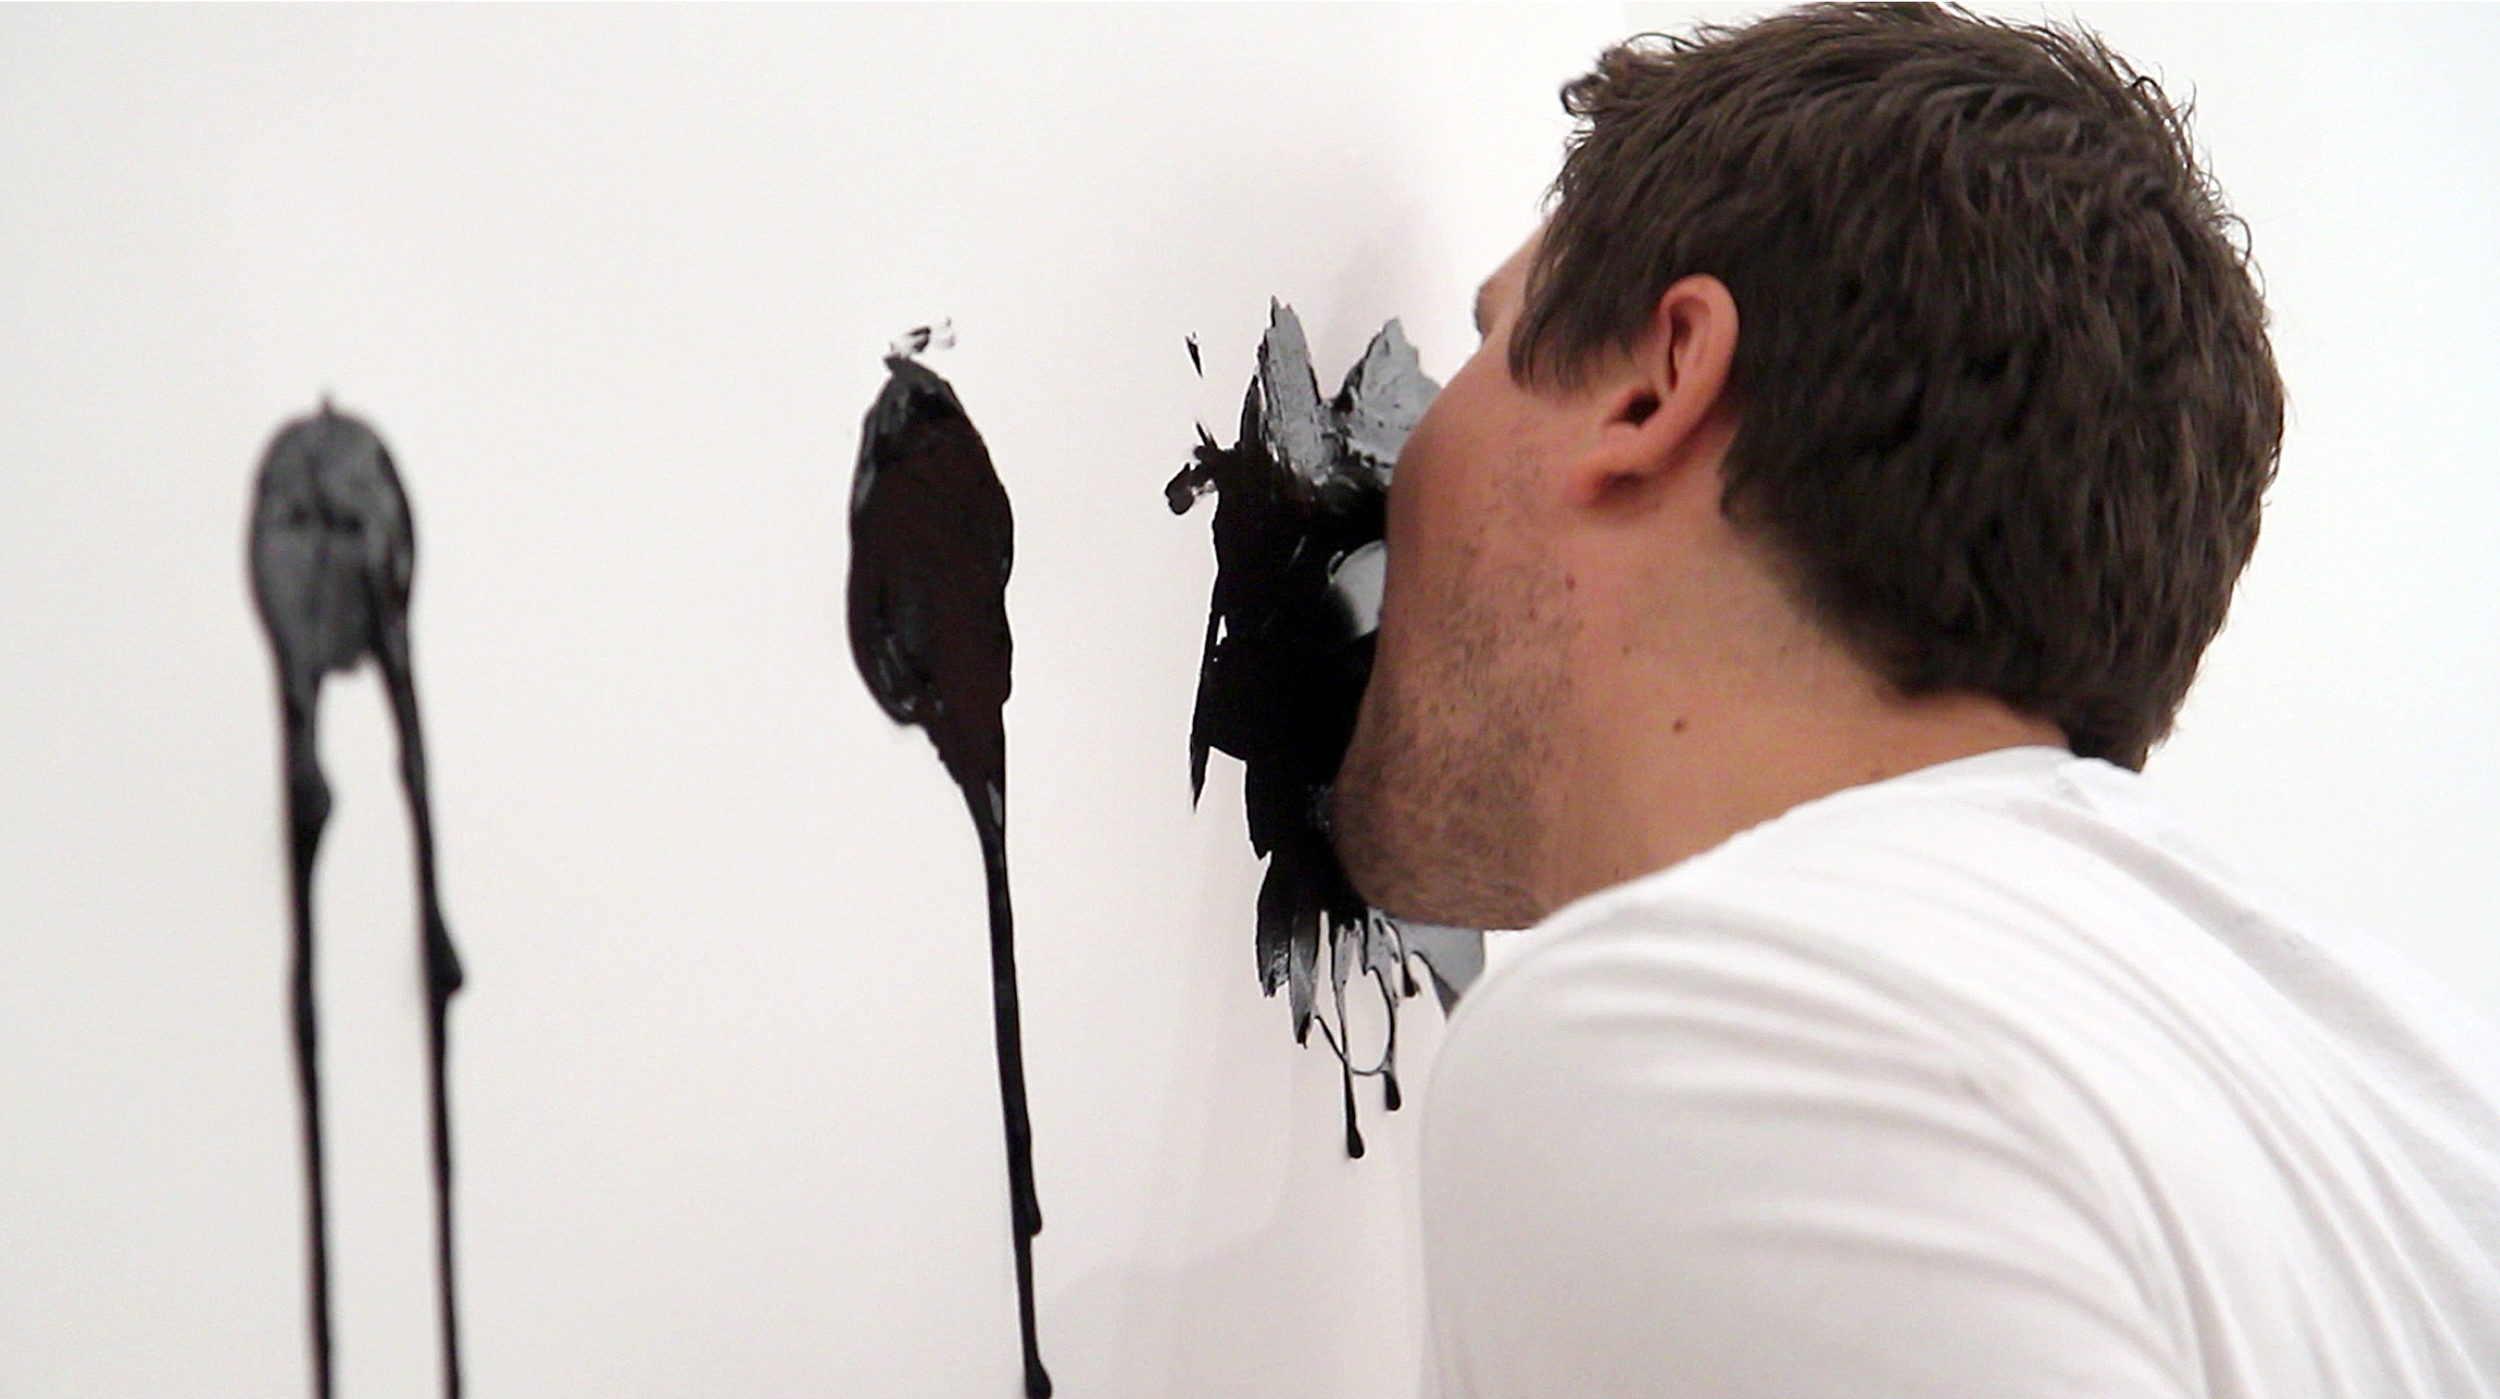   Attempting to Capture Taste (Spication, Rotation, Verrition)  Performance (Squid ink applied by tongue on paper) Duration 9:54 minutes Jaus Gallery, West Los Angeles, CA. November 10th, 2012  Video Courtesy of Sean Flaherty 